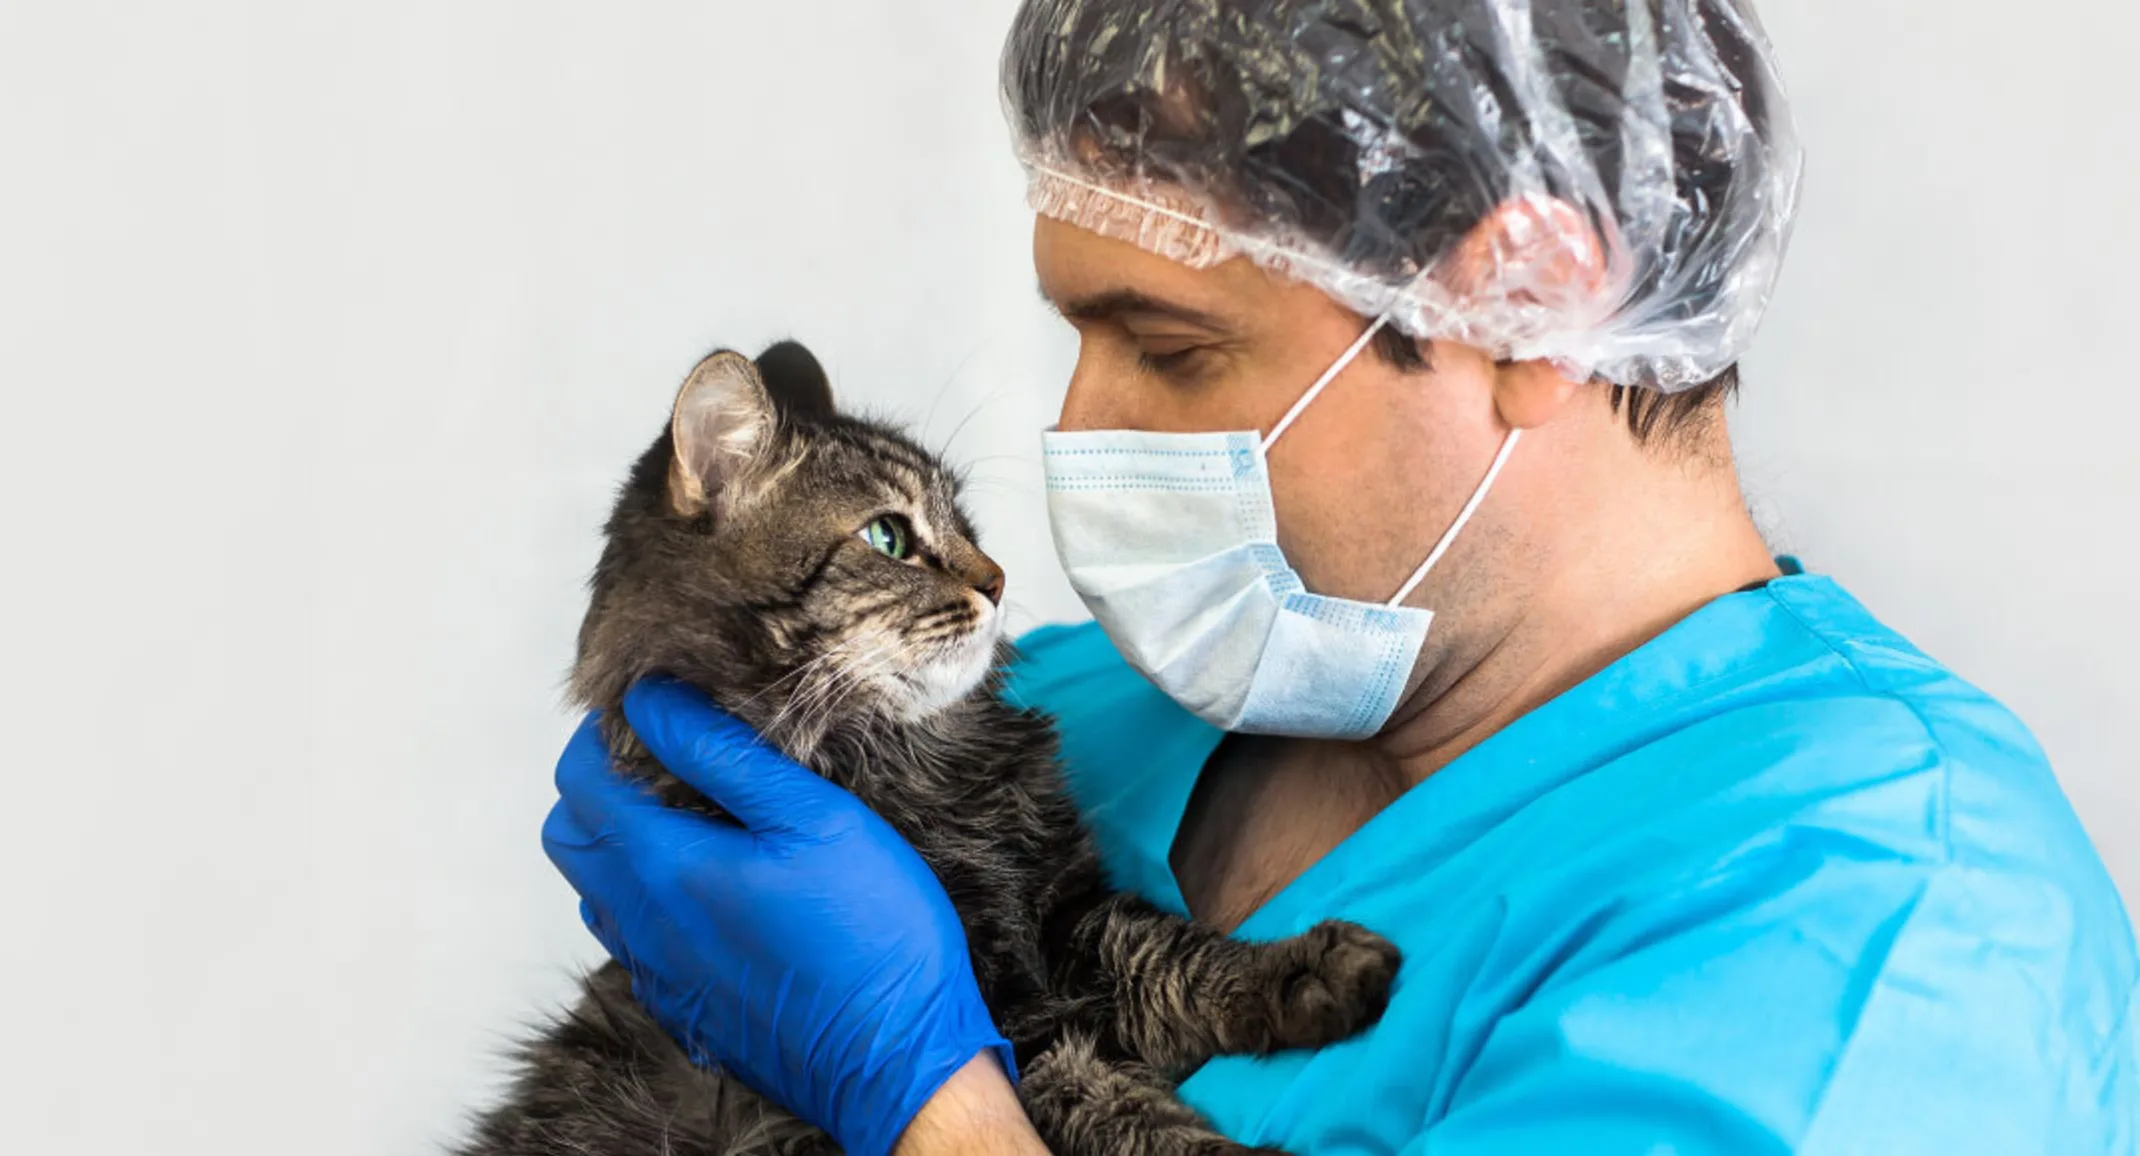 Male staff veterinarian with covid-19 mask is holding a black and grey tabby cat.